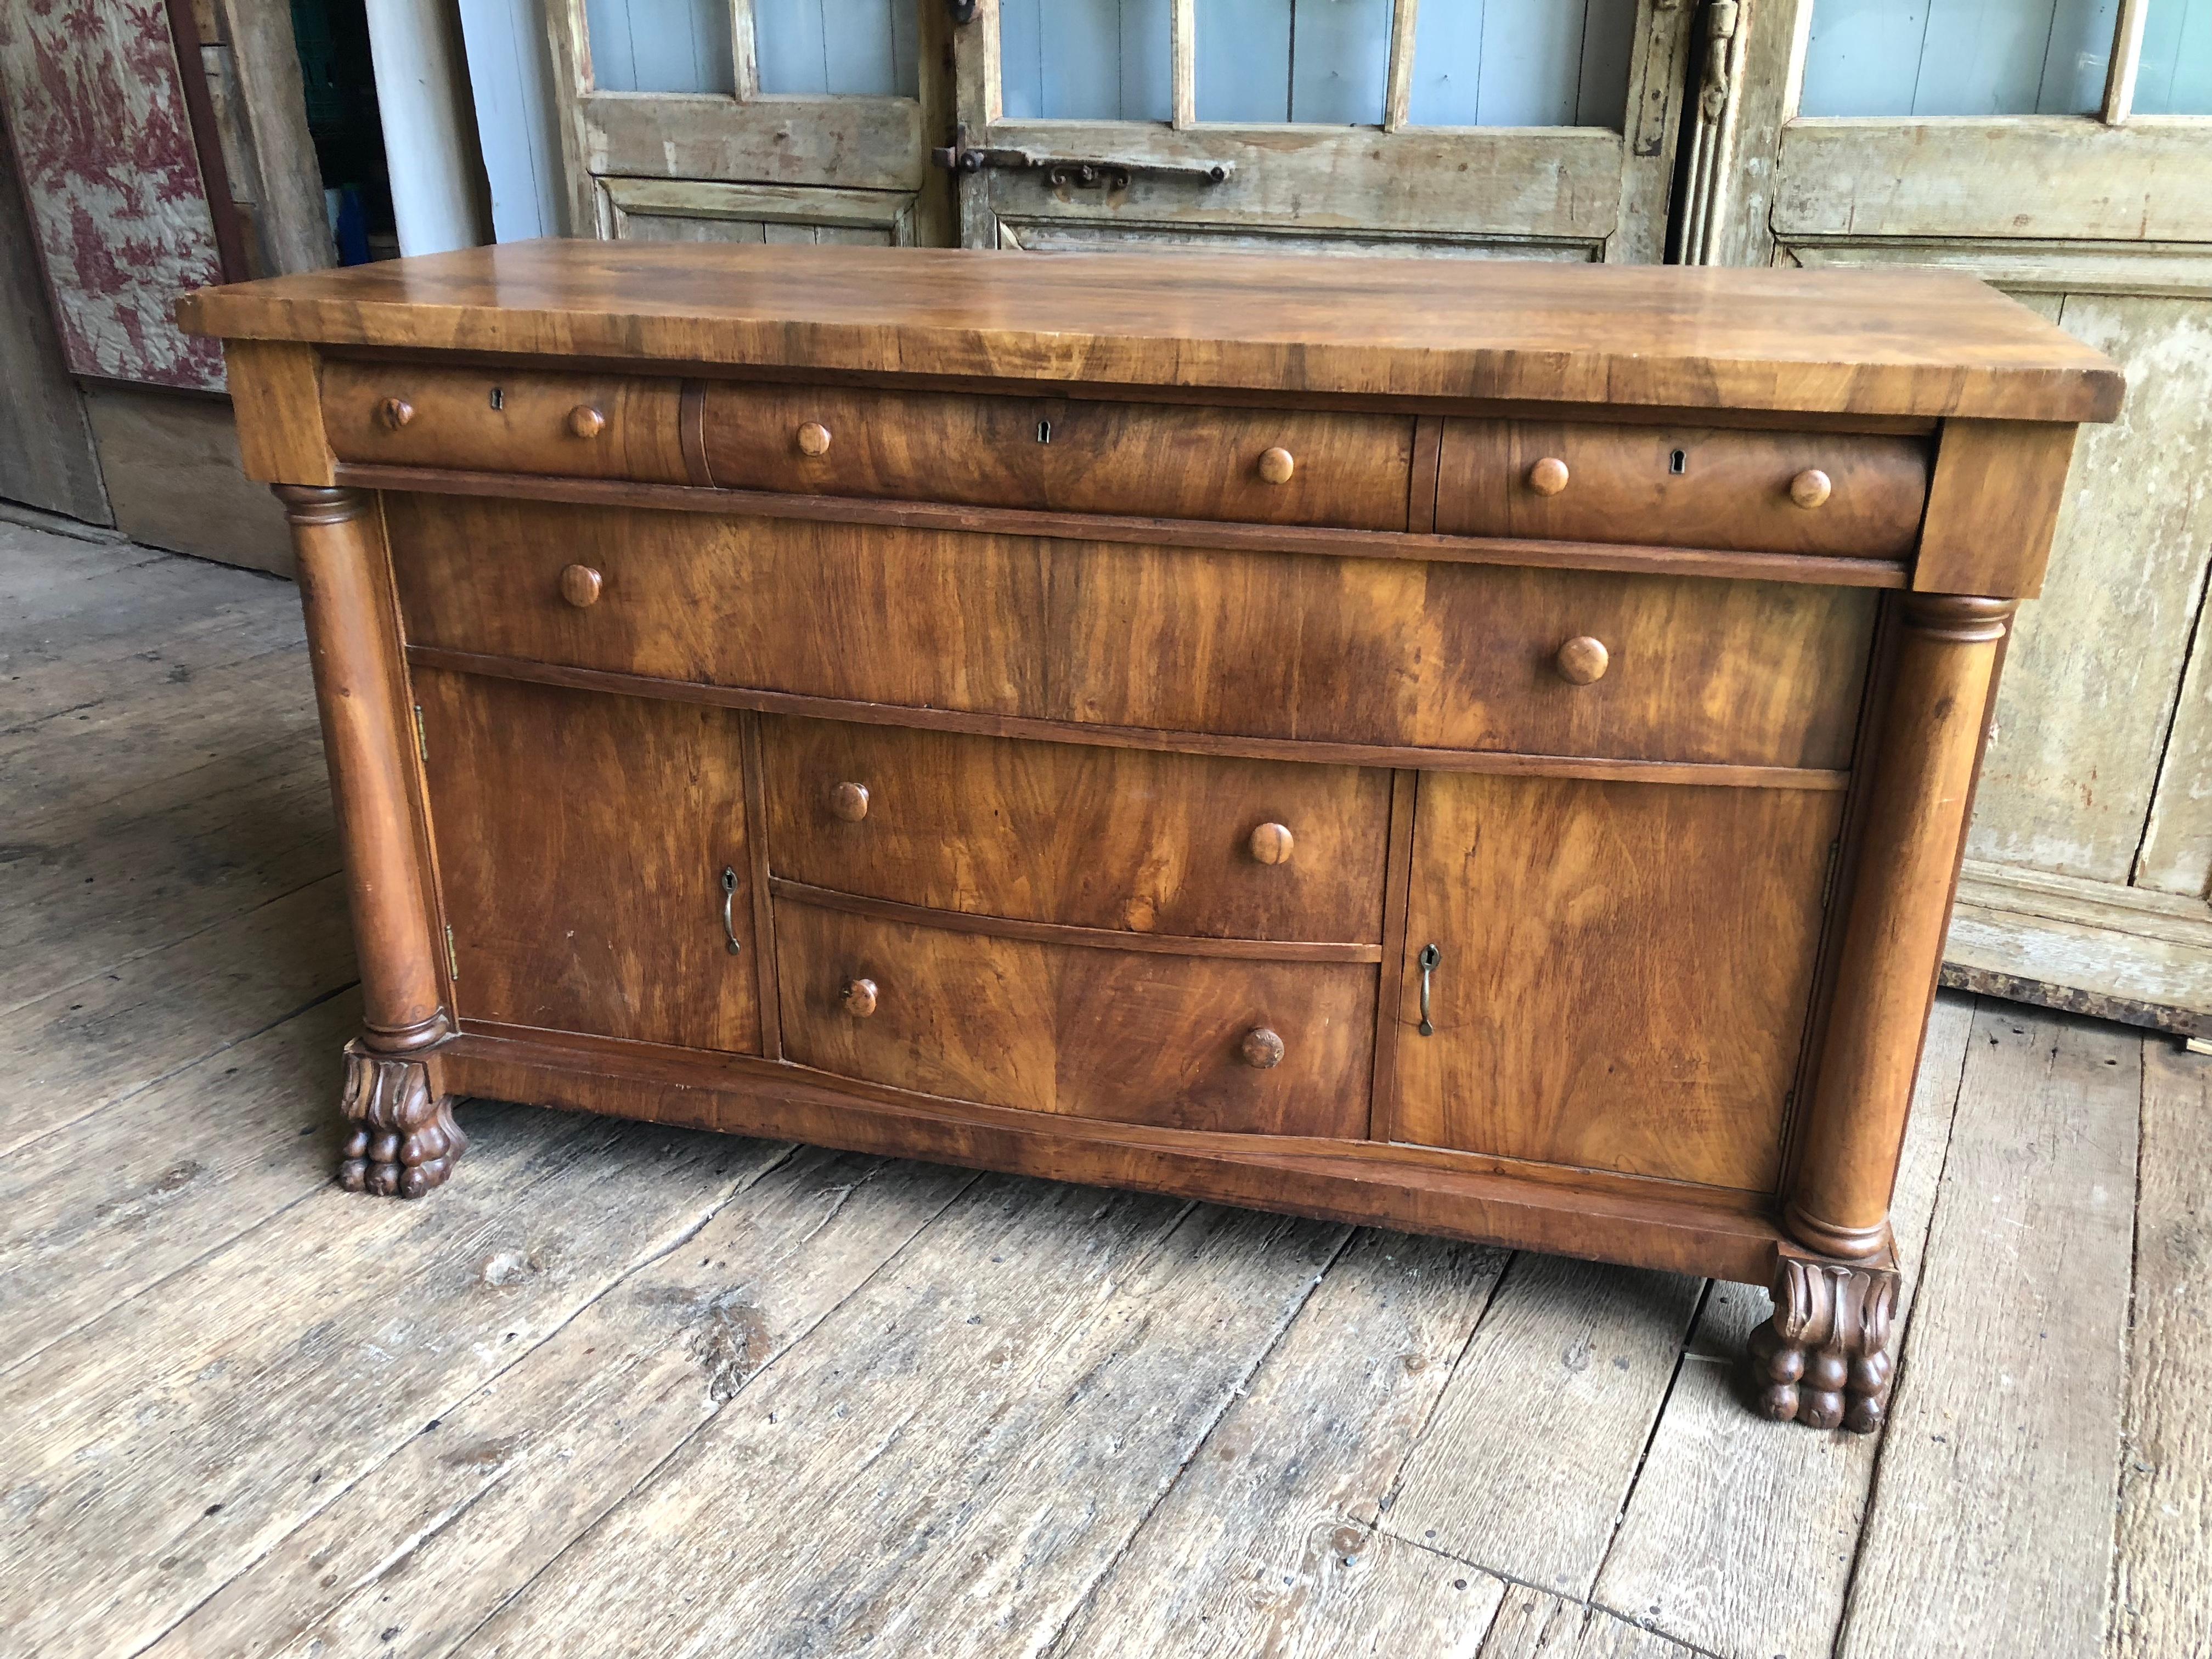 A nice American Empire sideboard in light walnut veneer, with 5 short drawers, one full length drawer and two cabinets, with column form supports and carved lion’s paw feet, circa 1870.